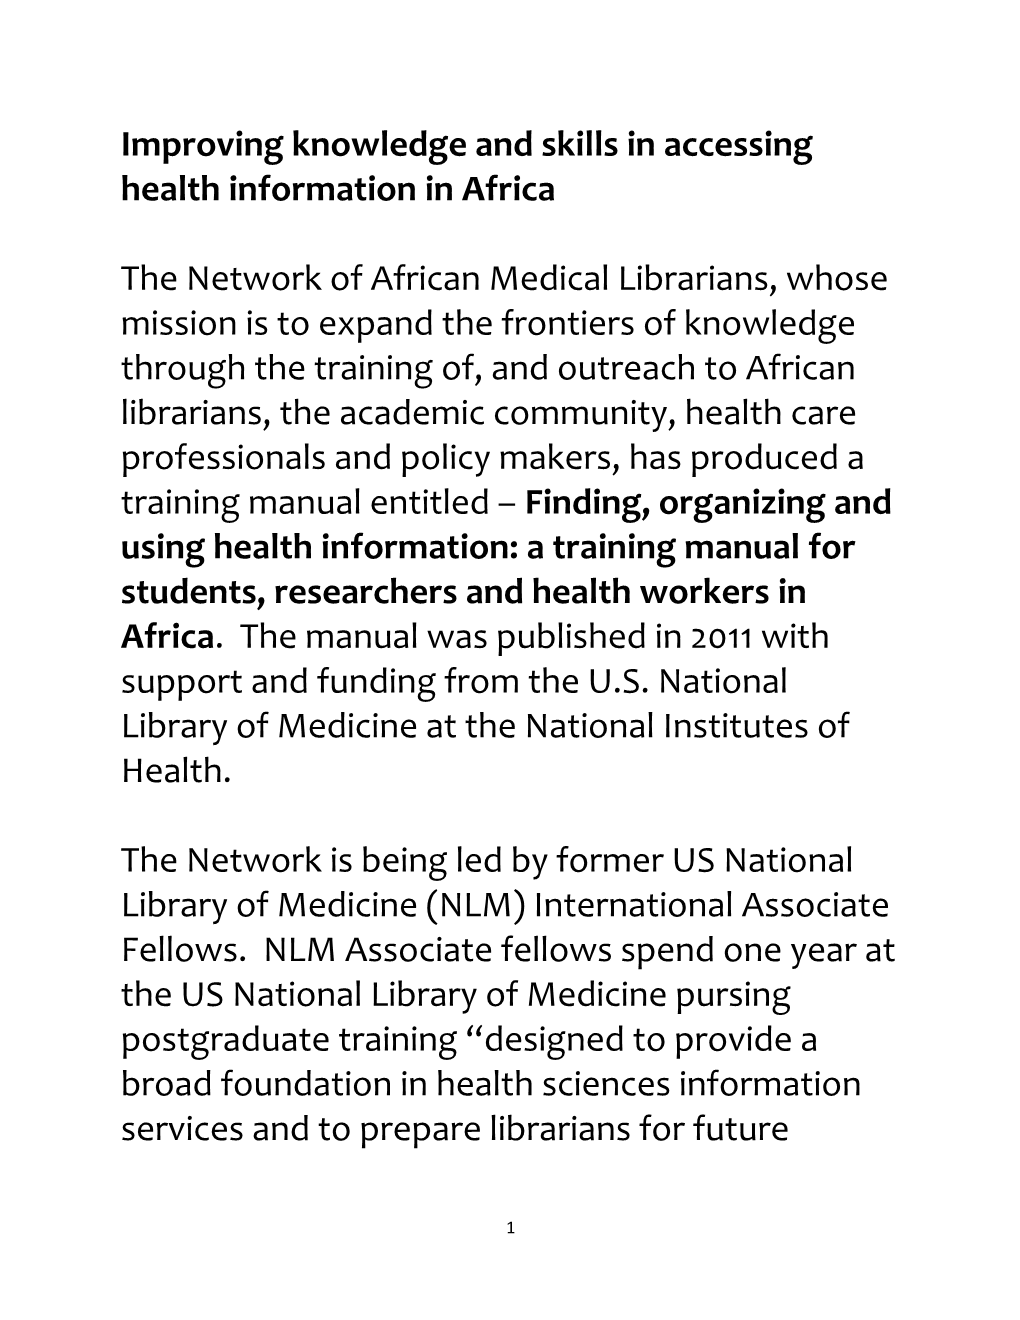 Improving Knowledge and Skills in Accessing Health Information in Africa